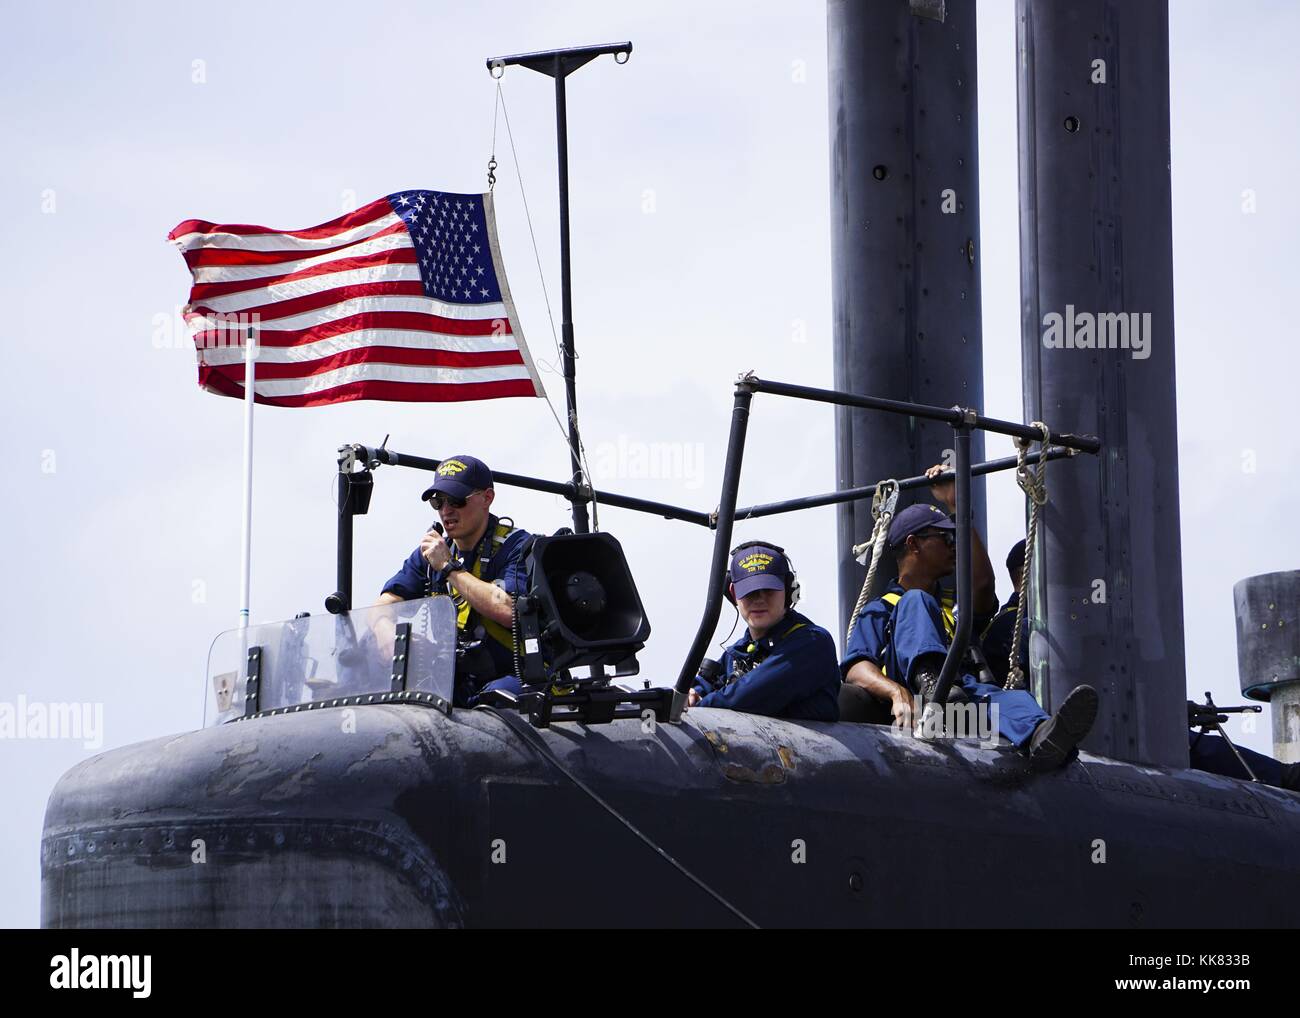 Sailors assigned to the Los Angeles-class attack submarine USS Albuquerque SSN 706 stand watch as the boat departs Diego Garcia. Image courtesy Chief Fire Control Technician Jeremy Gross/US Navy, 2015. Stock Photo